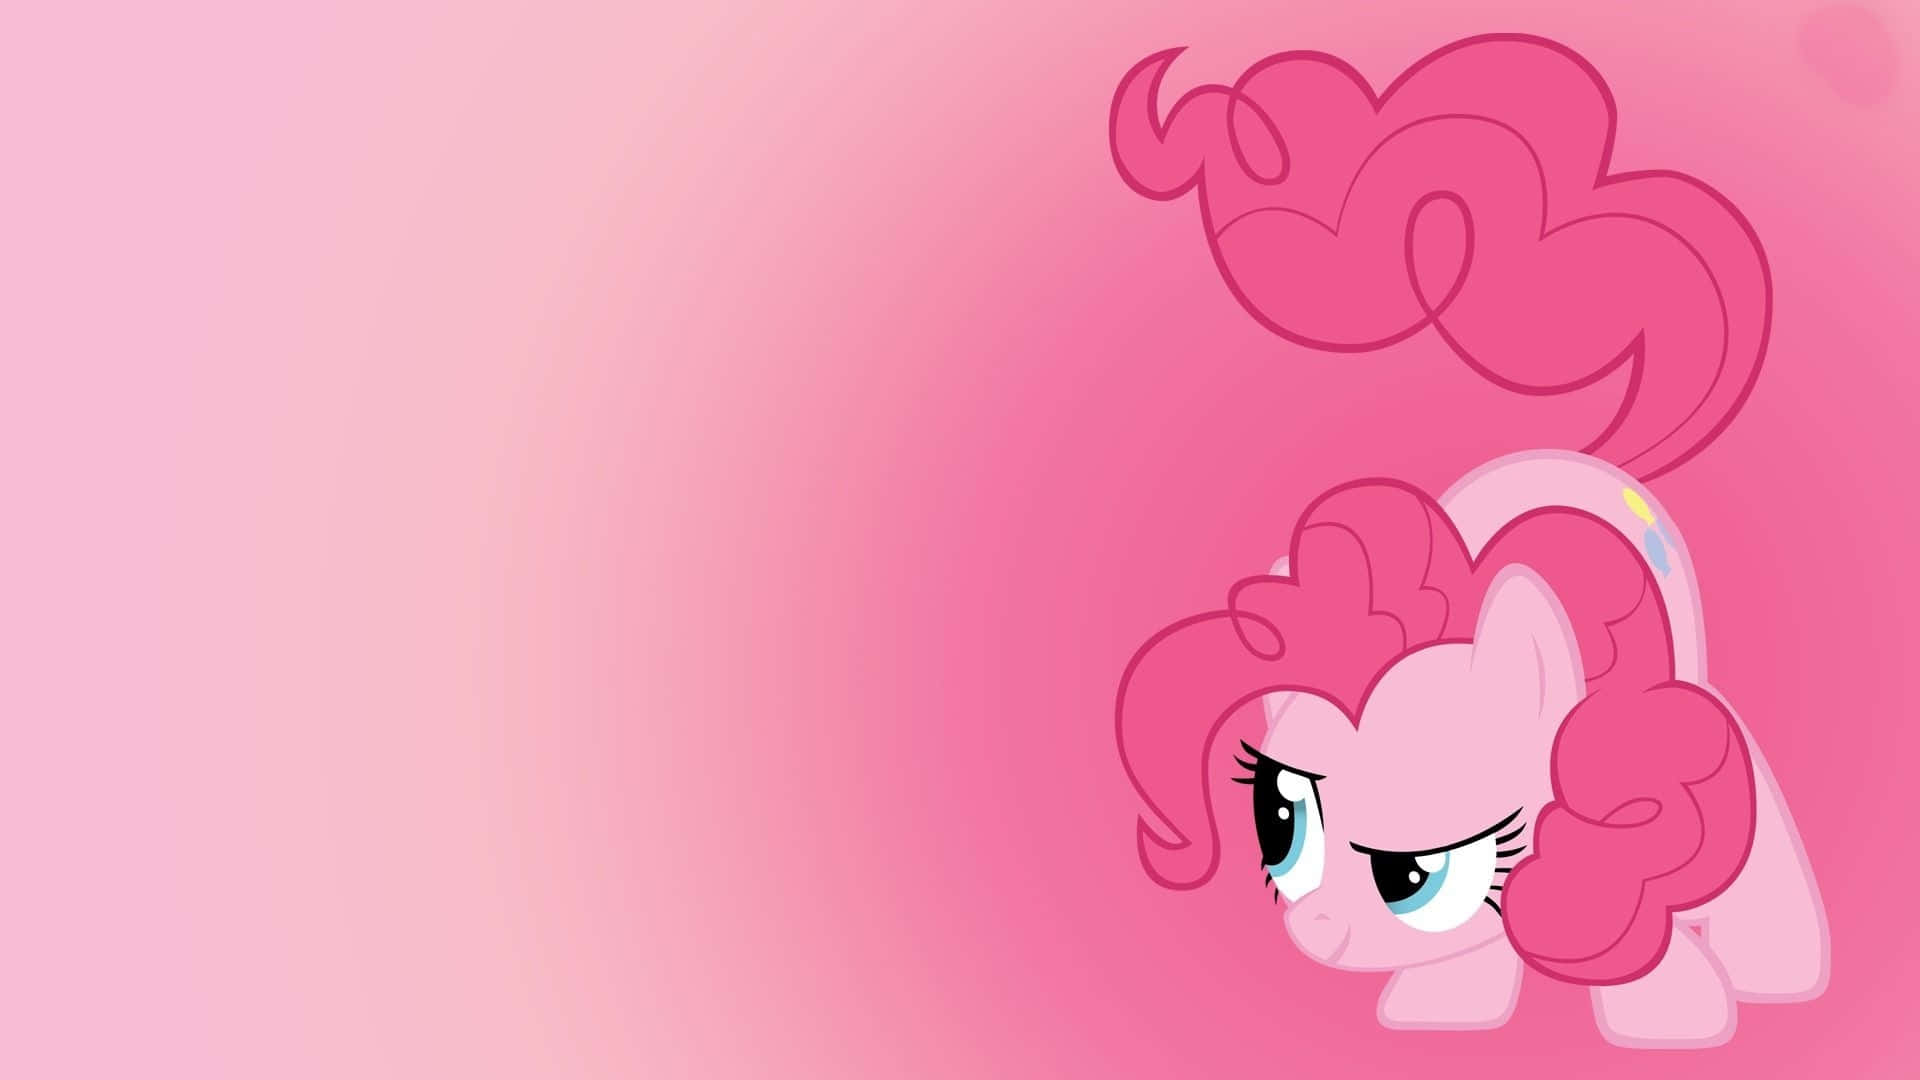 Pinkie Pie looks extra cheerful on a beautiful day.